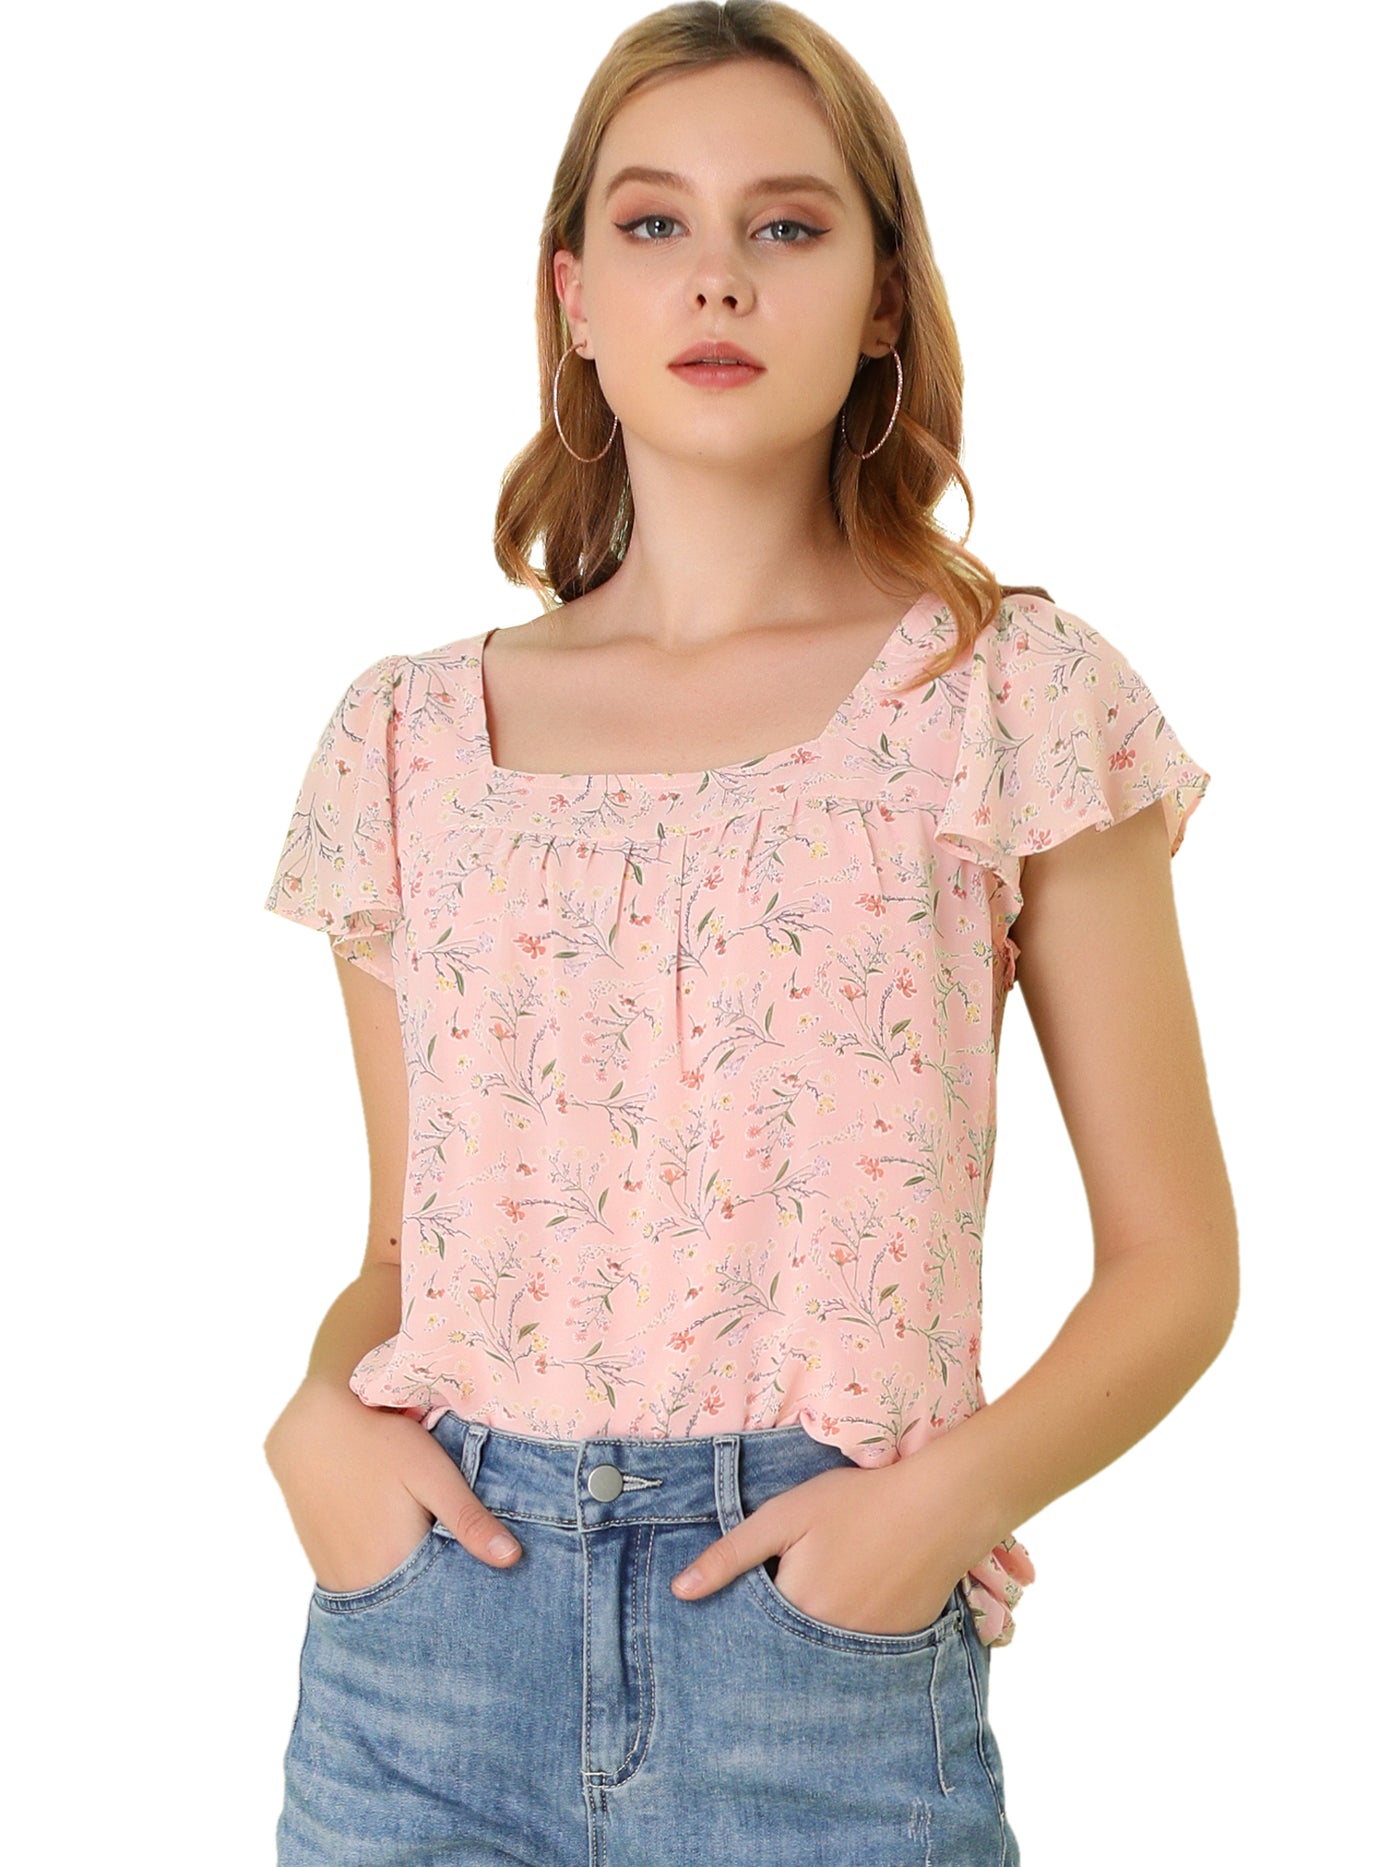 Allegra K Chiffon Ruffle Sleeve Top Layered Vintage Ditsy Floral Blouse